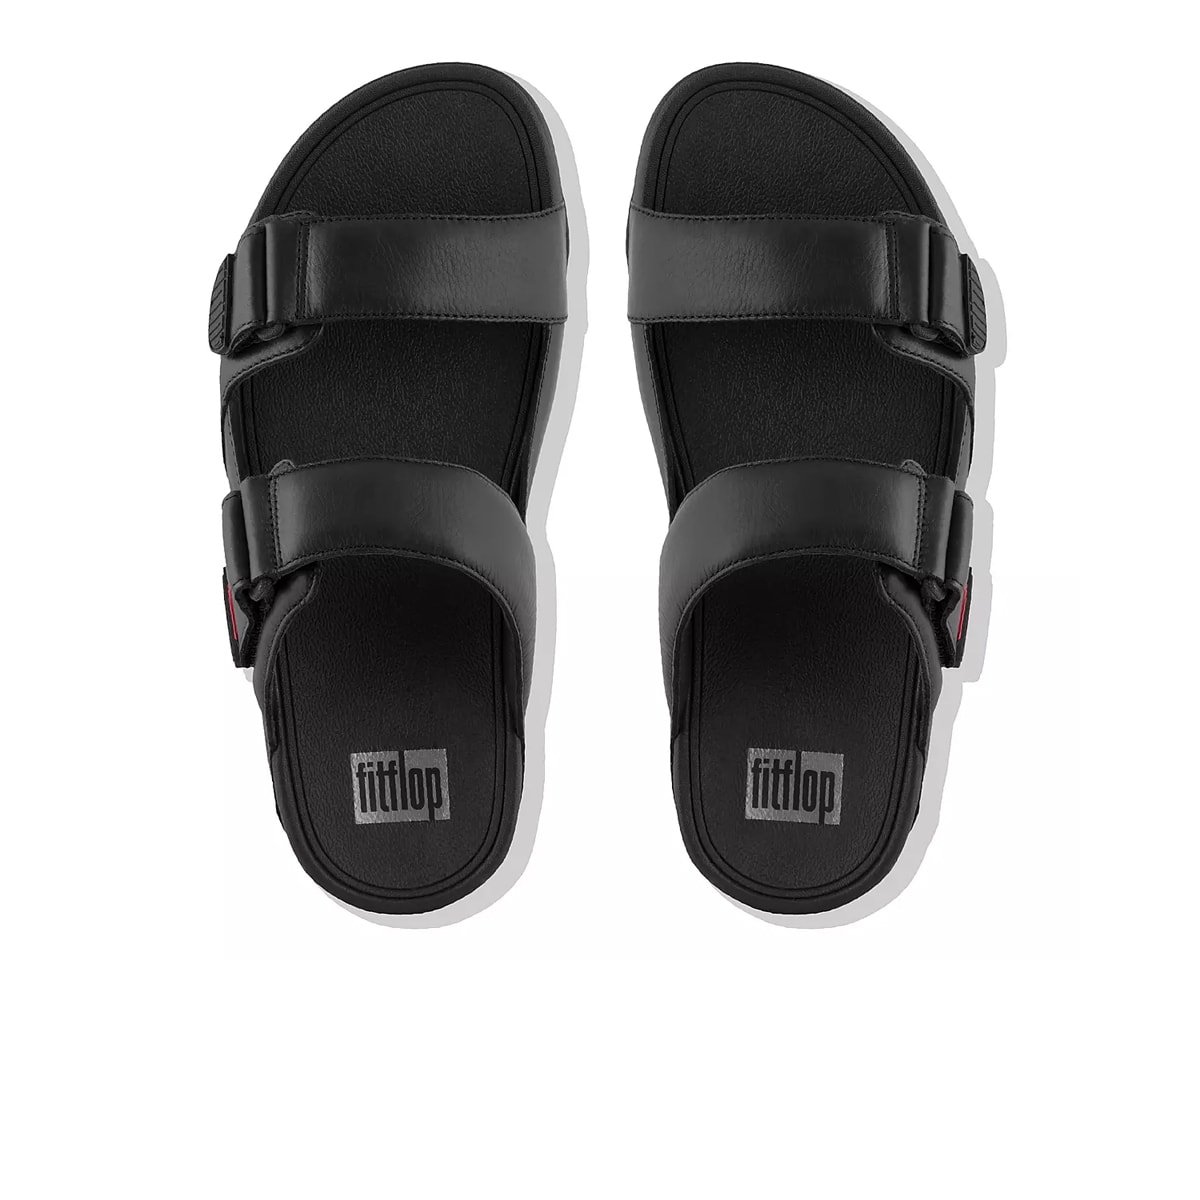 FitFlop GOGH MOC Adjustable Leather Slides Black top view